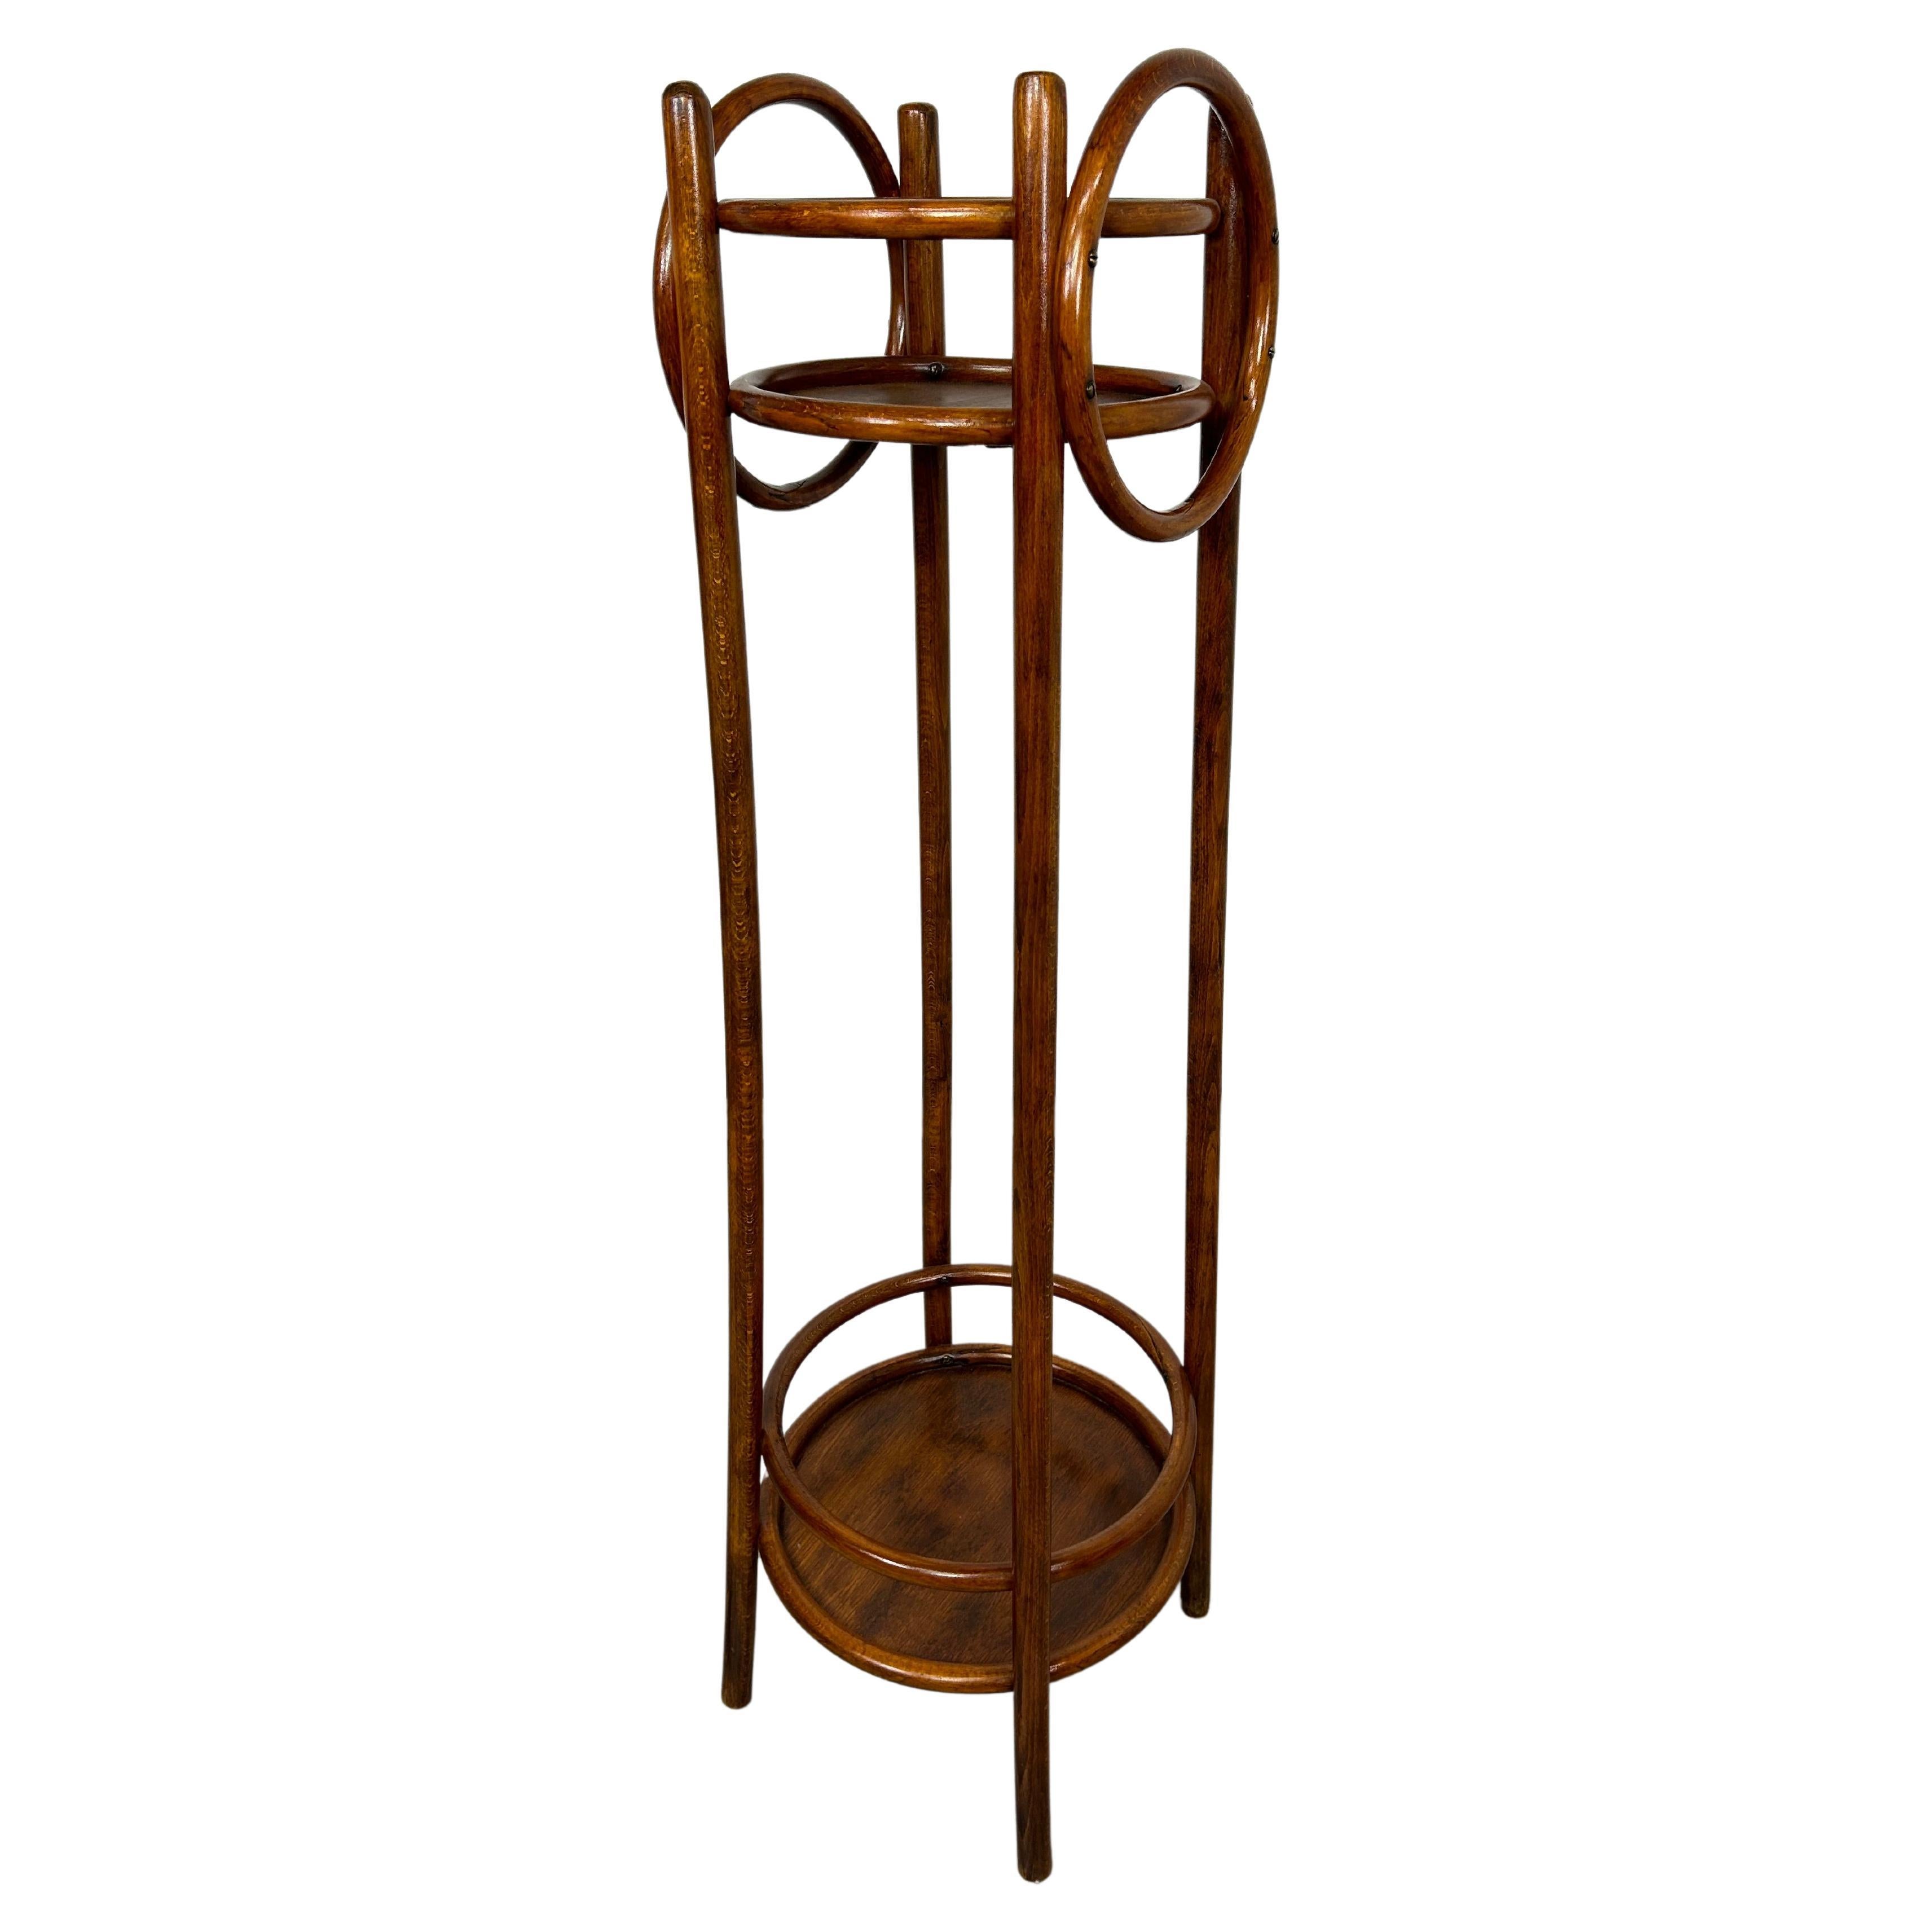 Bentwoon plant stand attr. Otto Wagner for Thonet